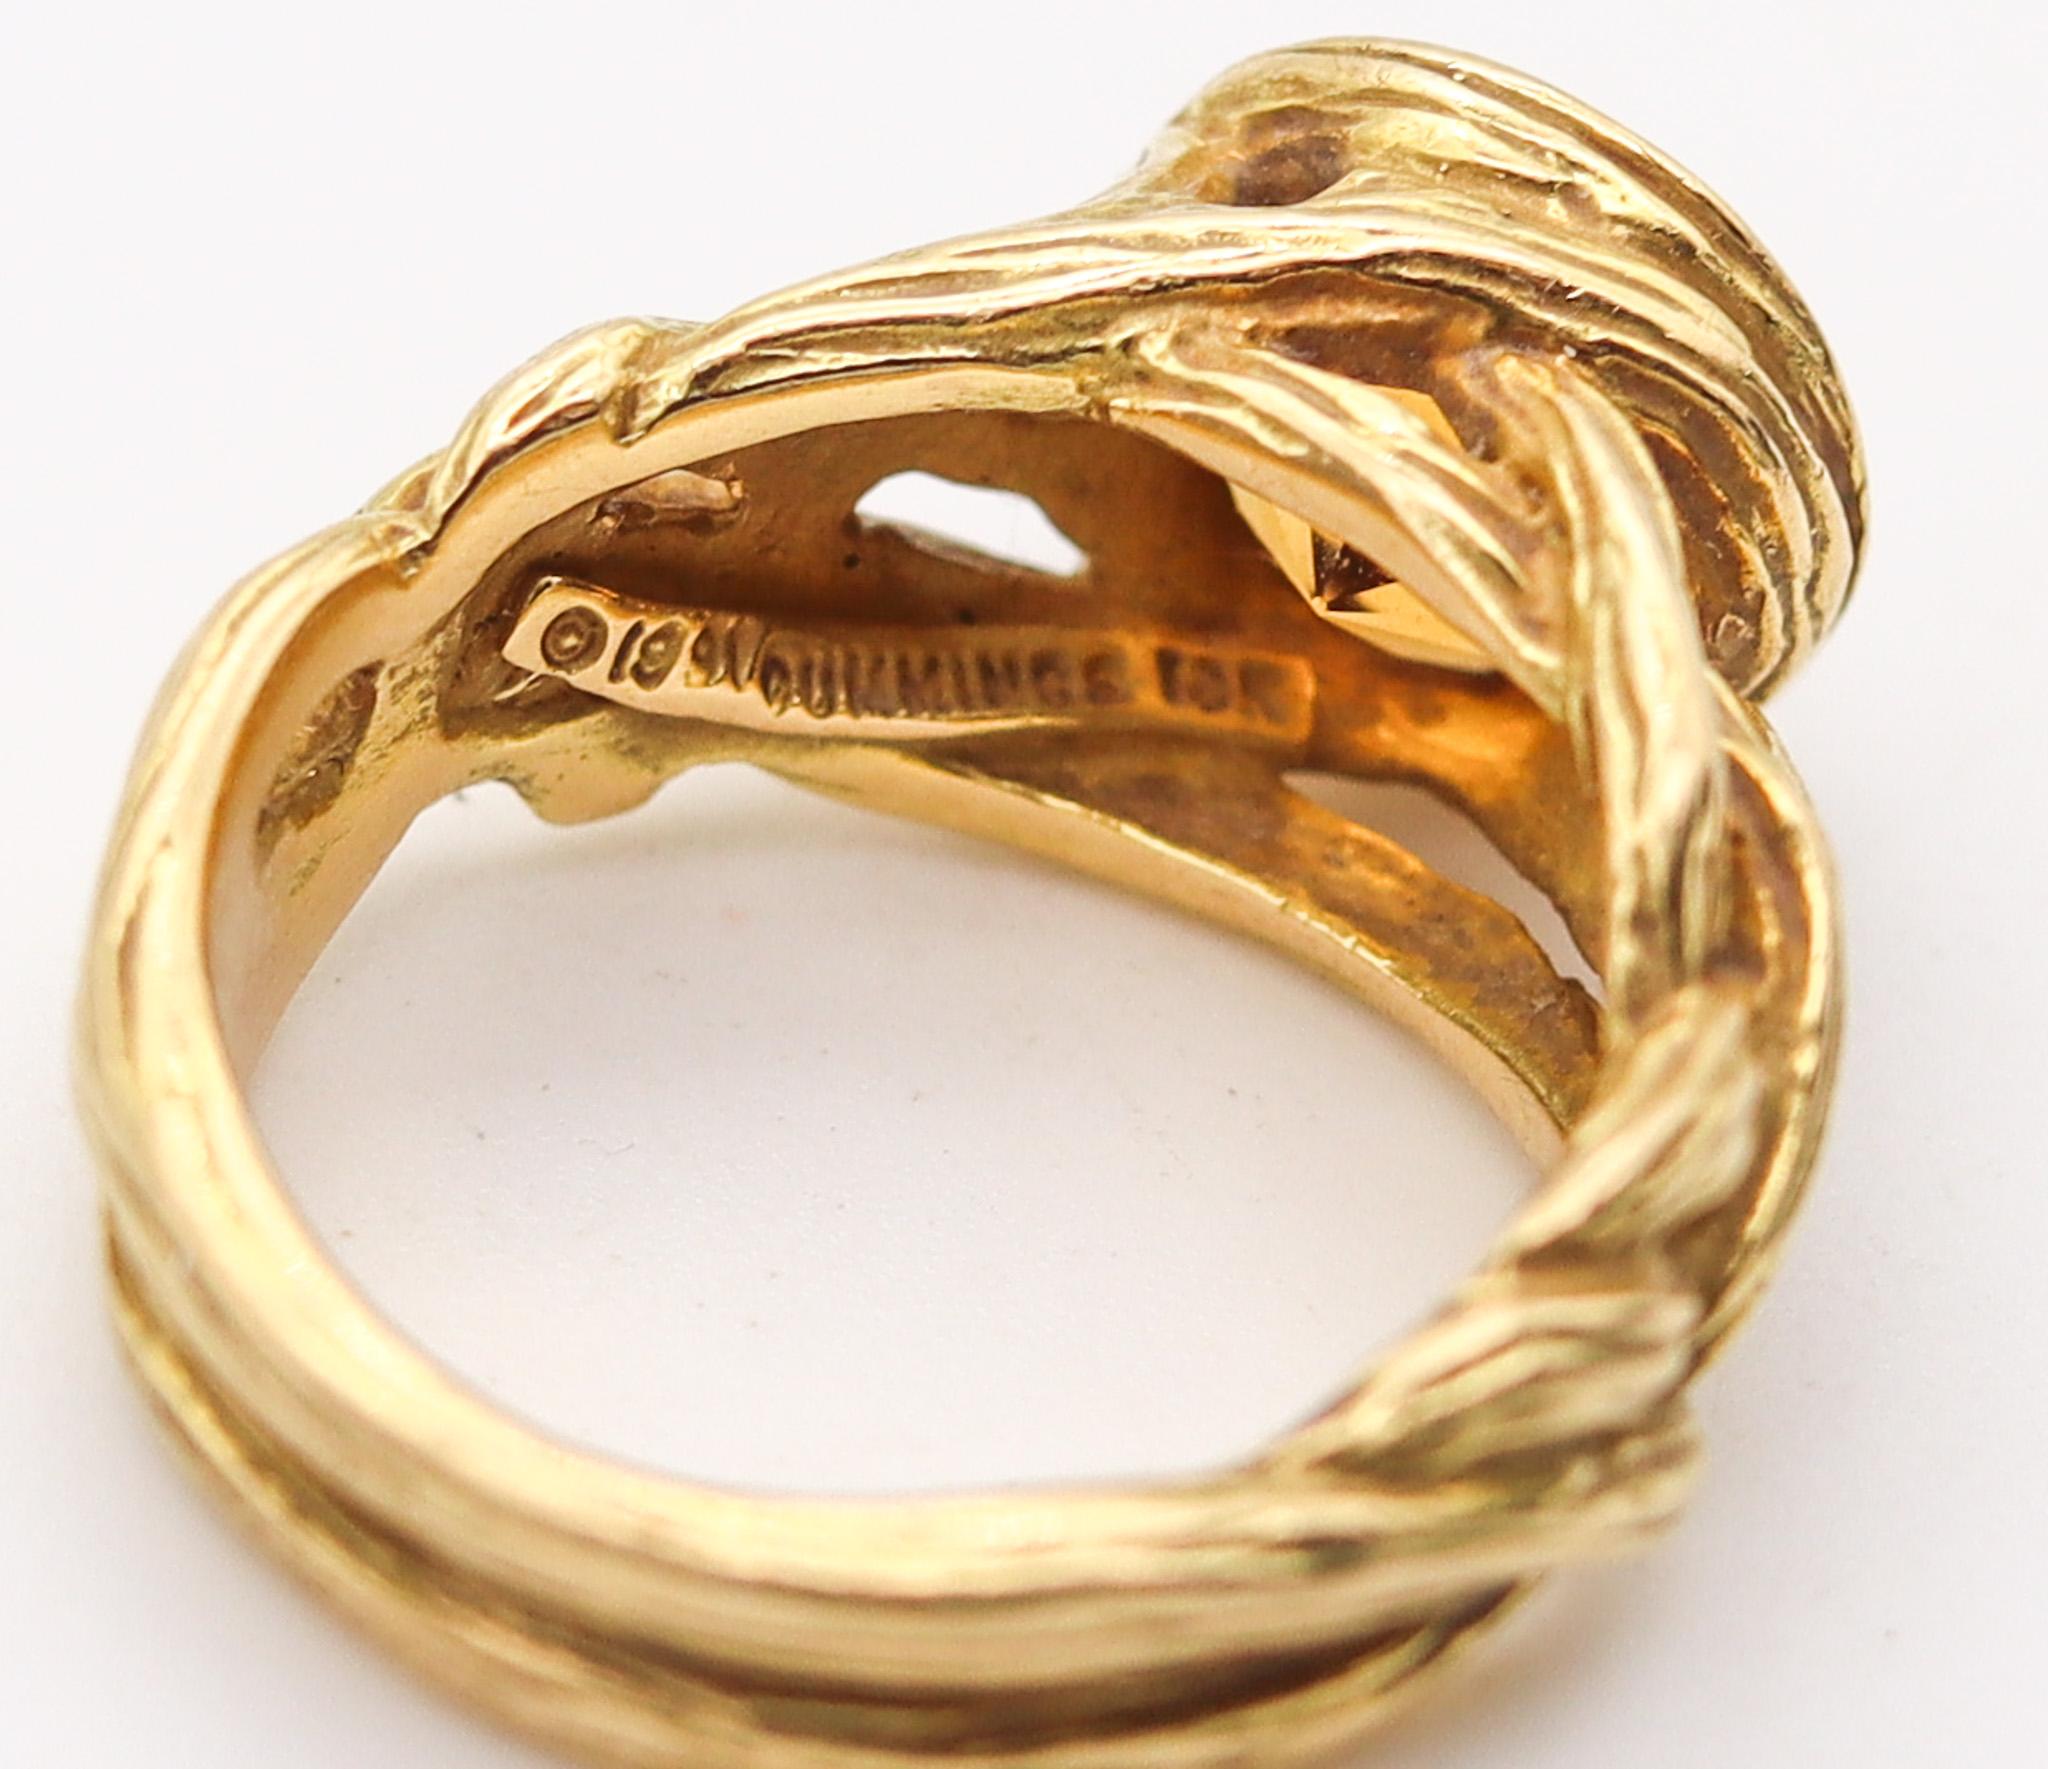 Brilliant Cut Angela Cummings 1991 Organic Roots Ring In 18Kt Gold With Round Orange Citrine For Sale